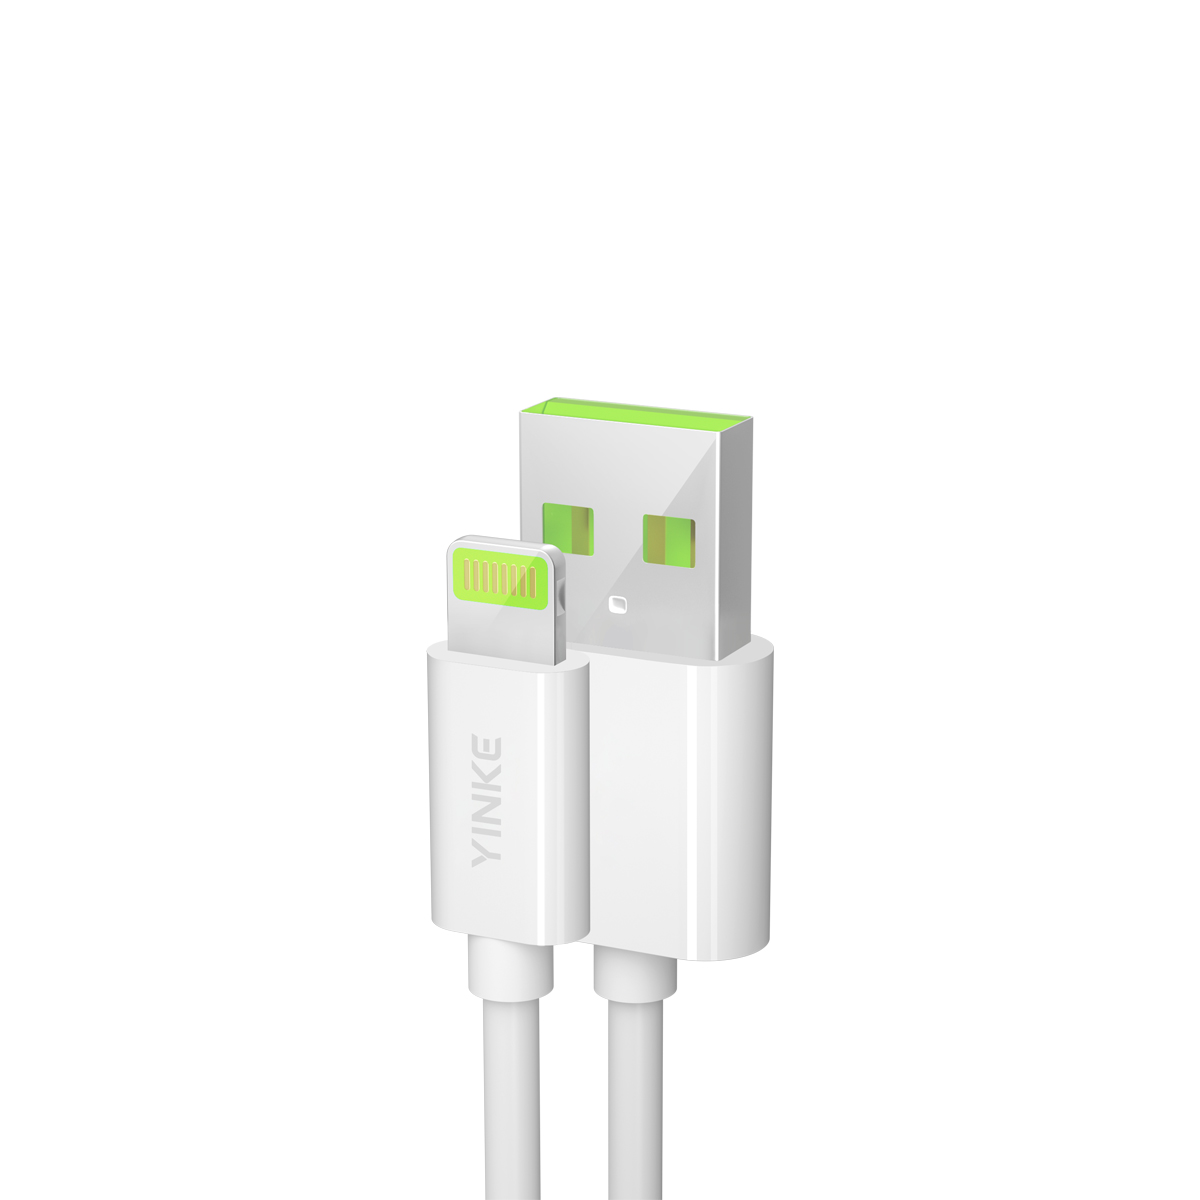 IPhone data cable